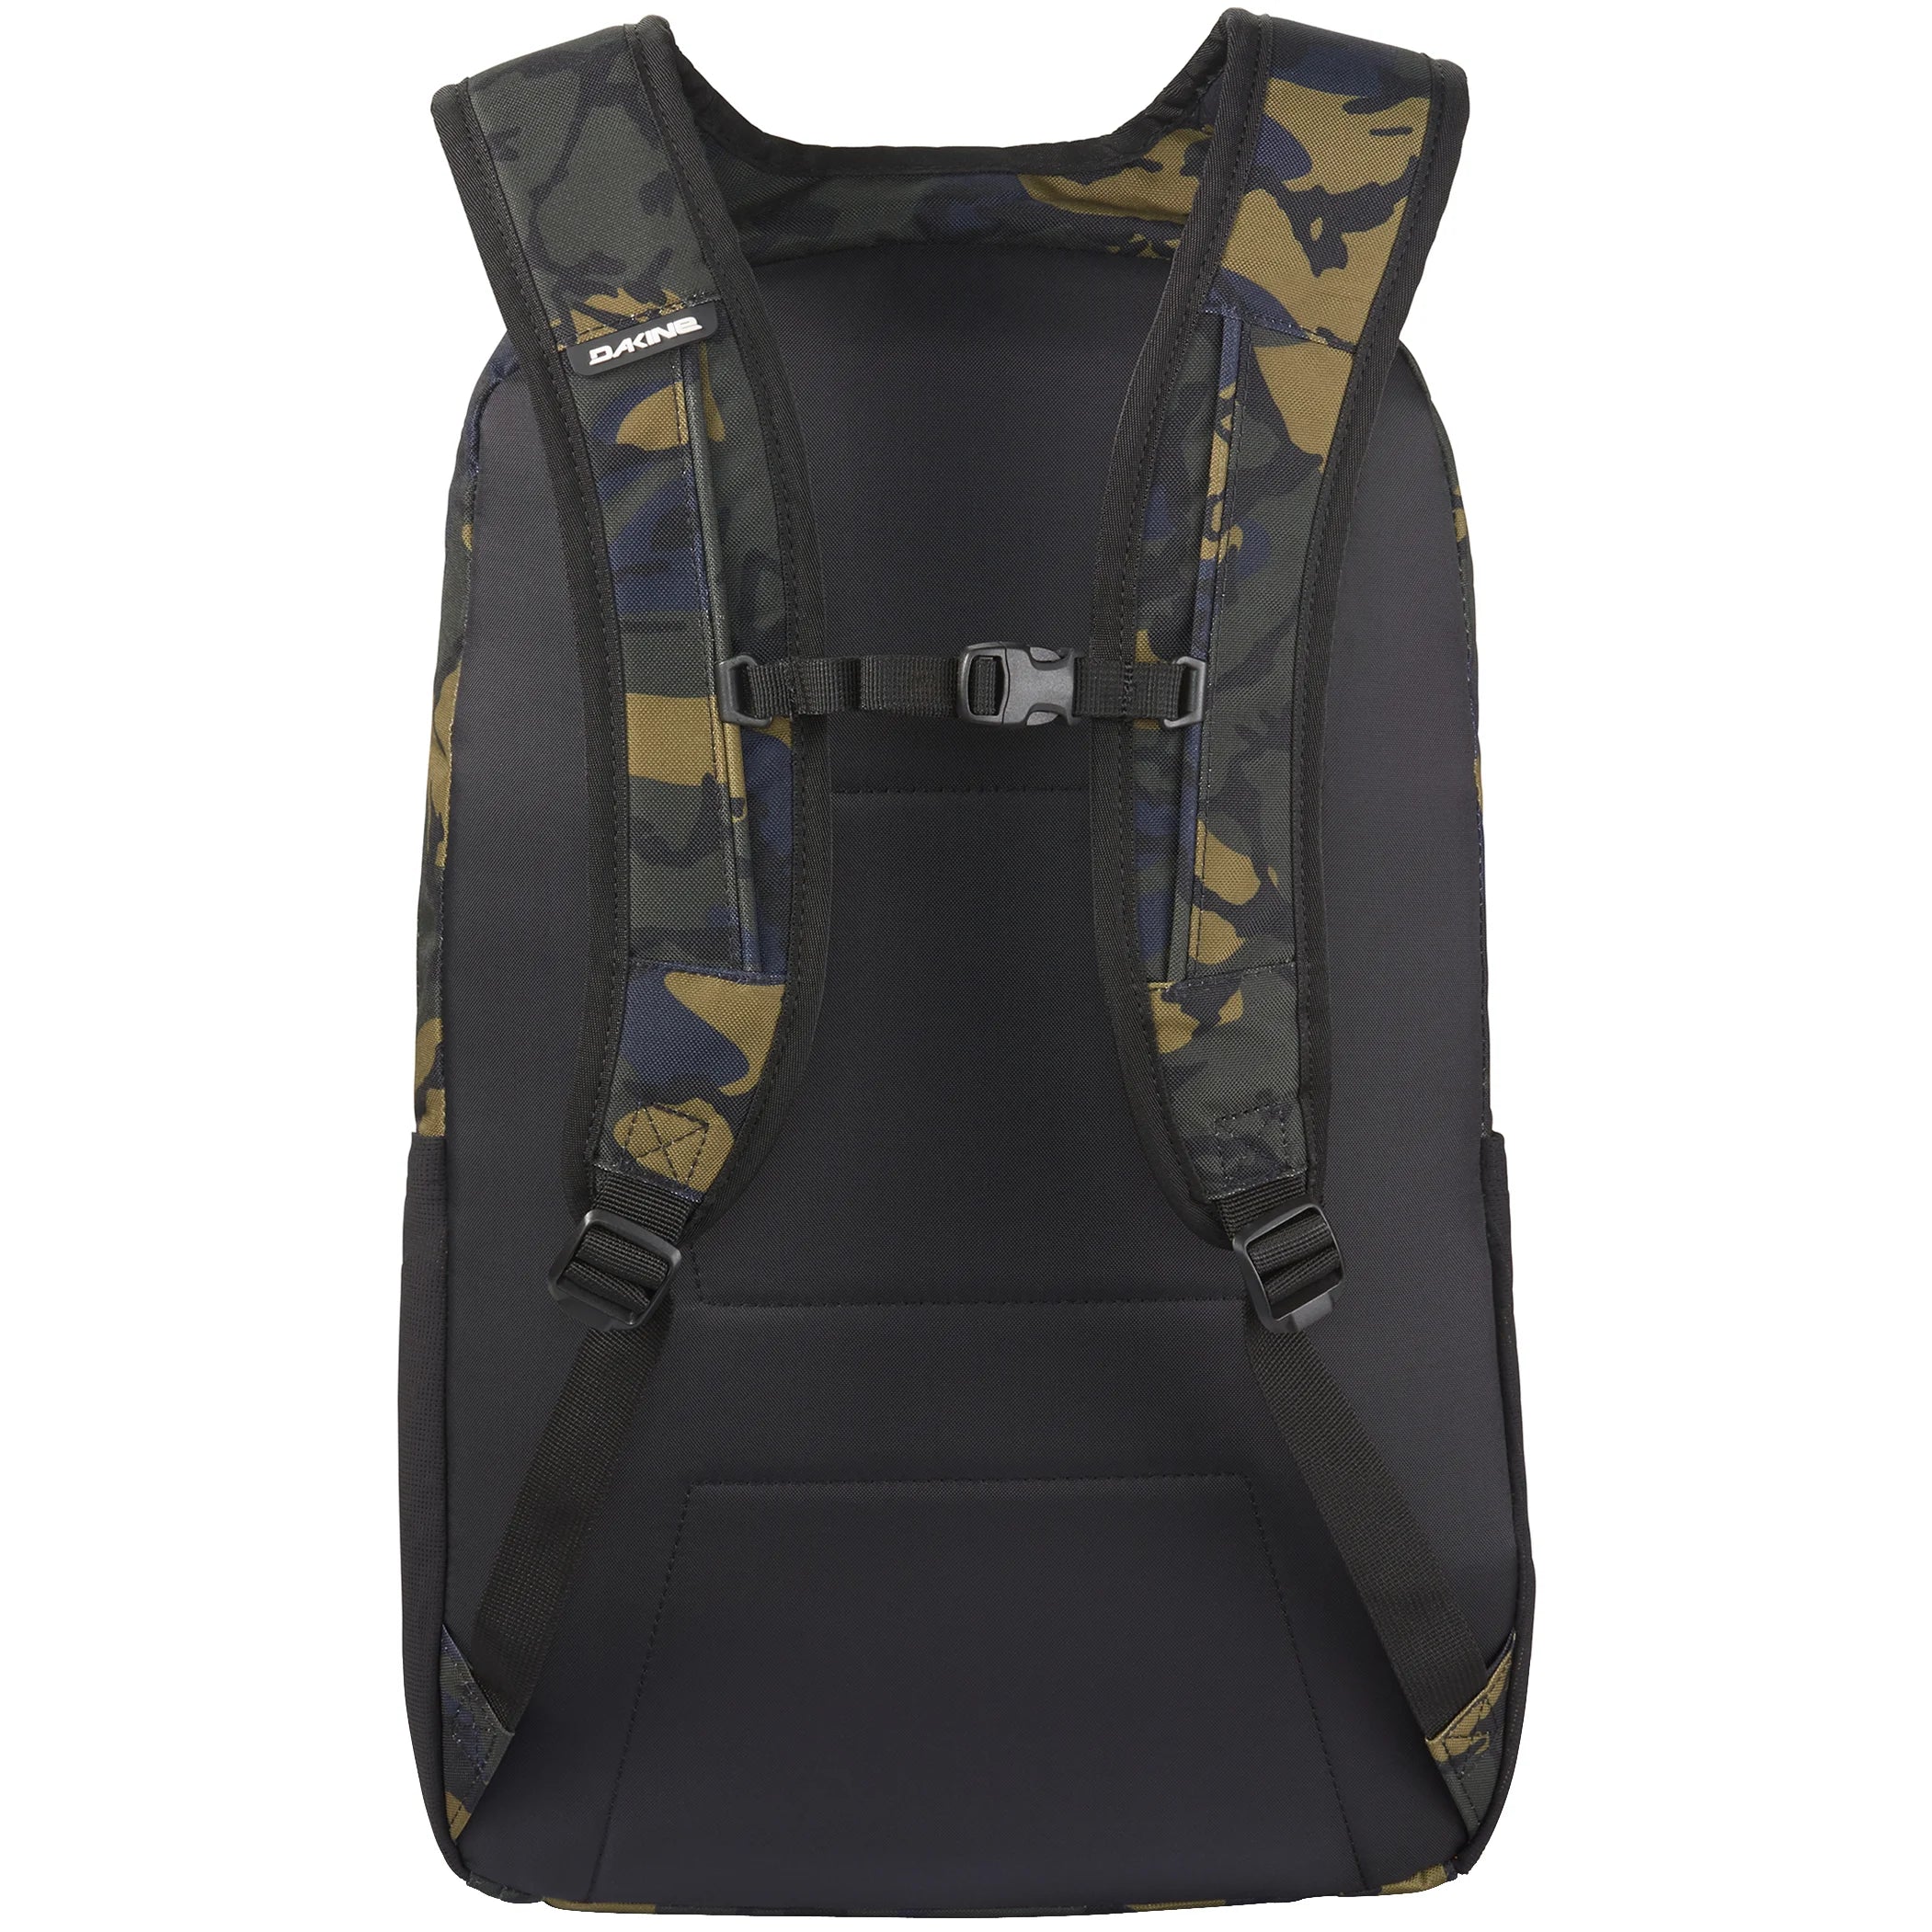 Dakine Packs & Bags Campus L 33L Backpack with Laptop Compartment 52 cm - Cascade Camo